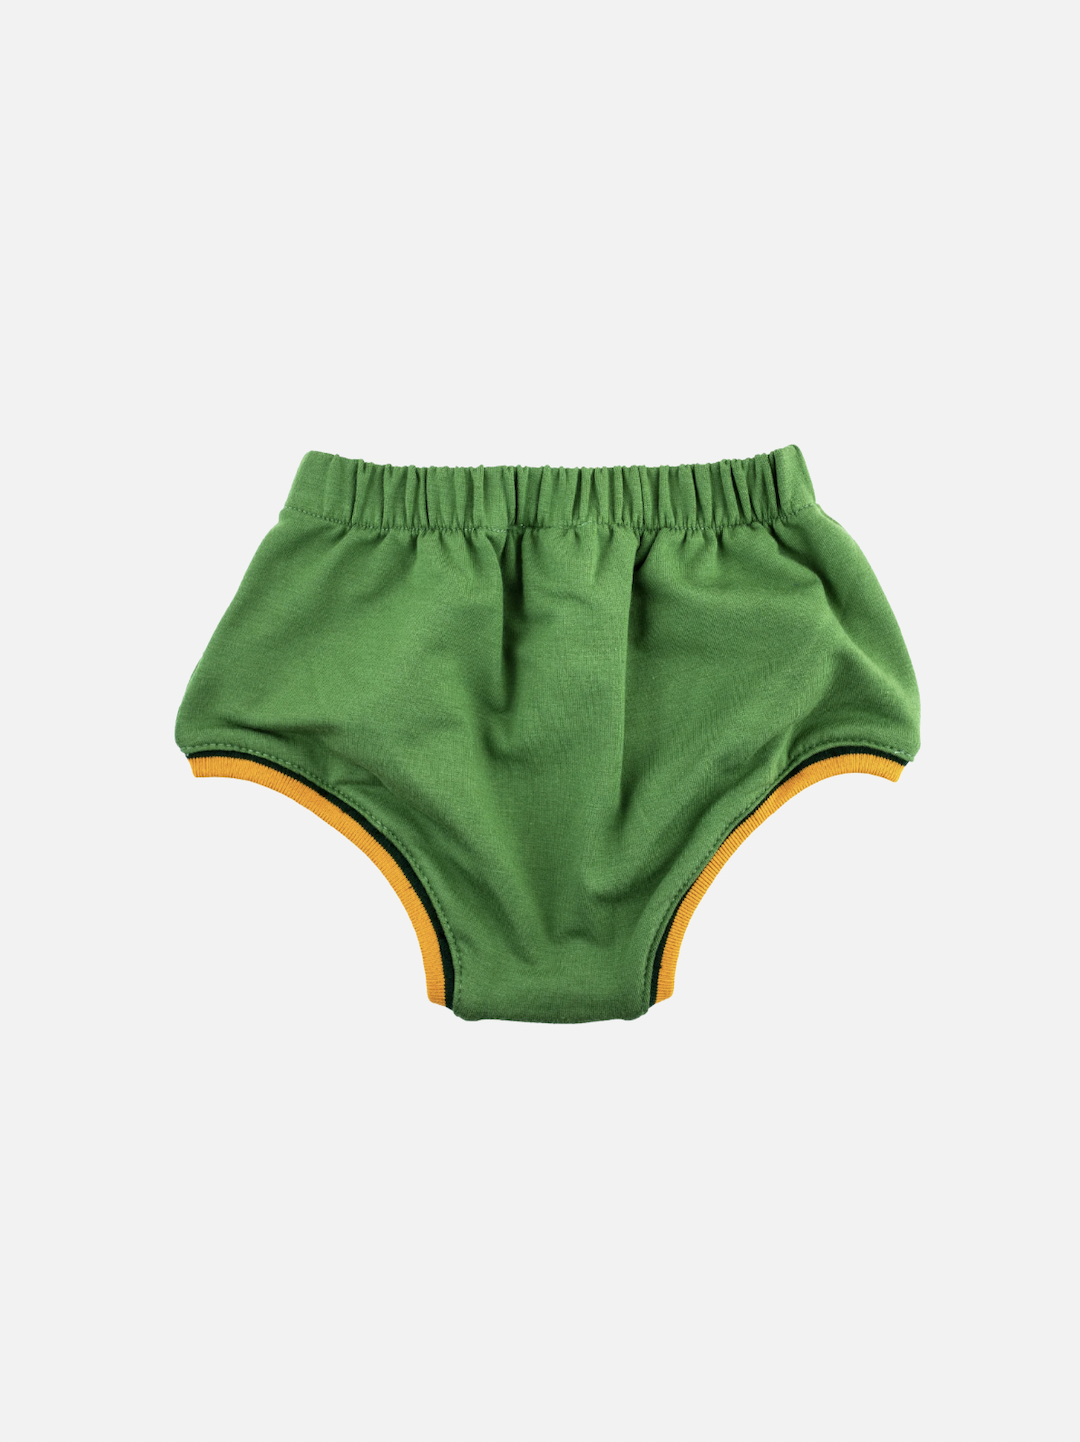 Mint green kids' bloomers with yellow trim at leg holes, back view